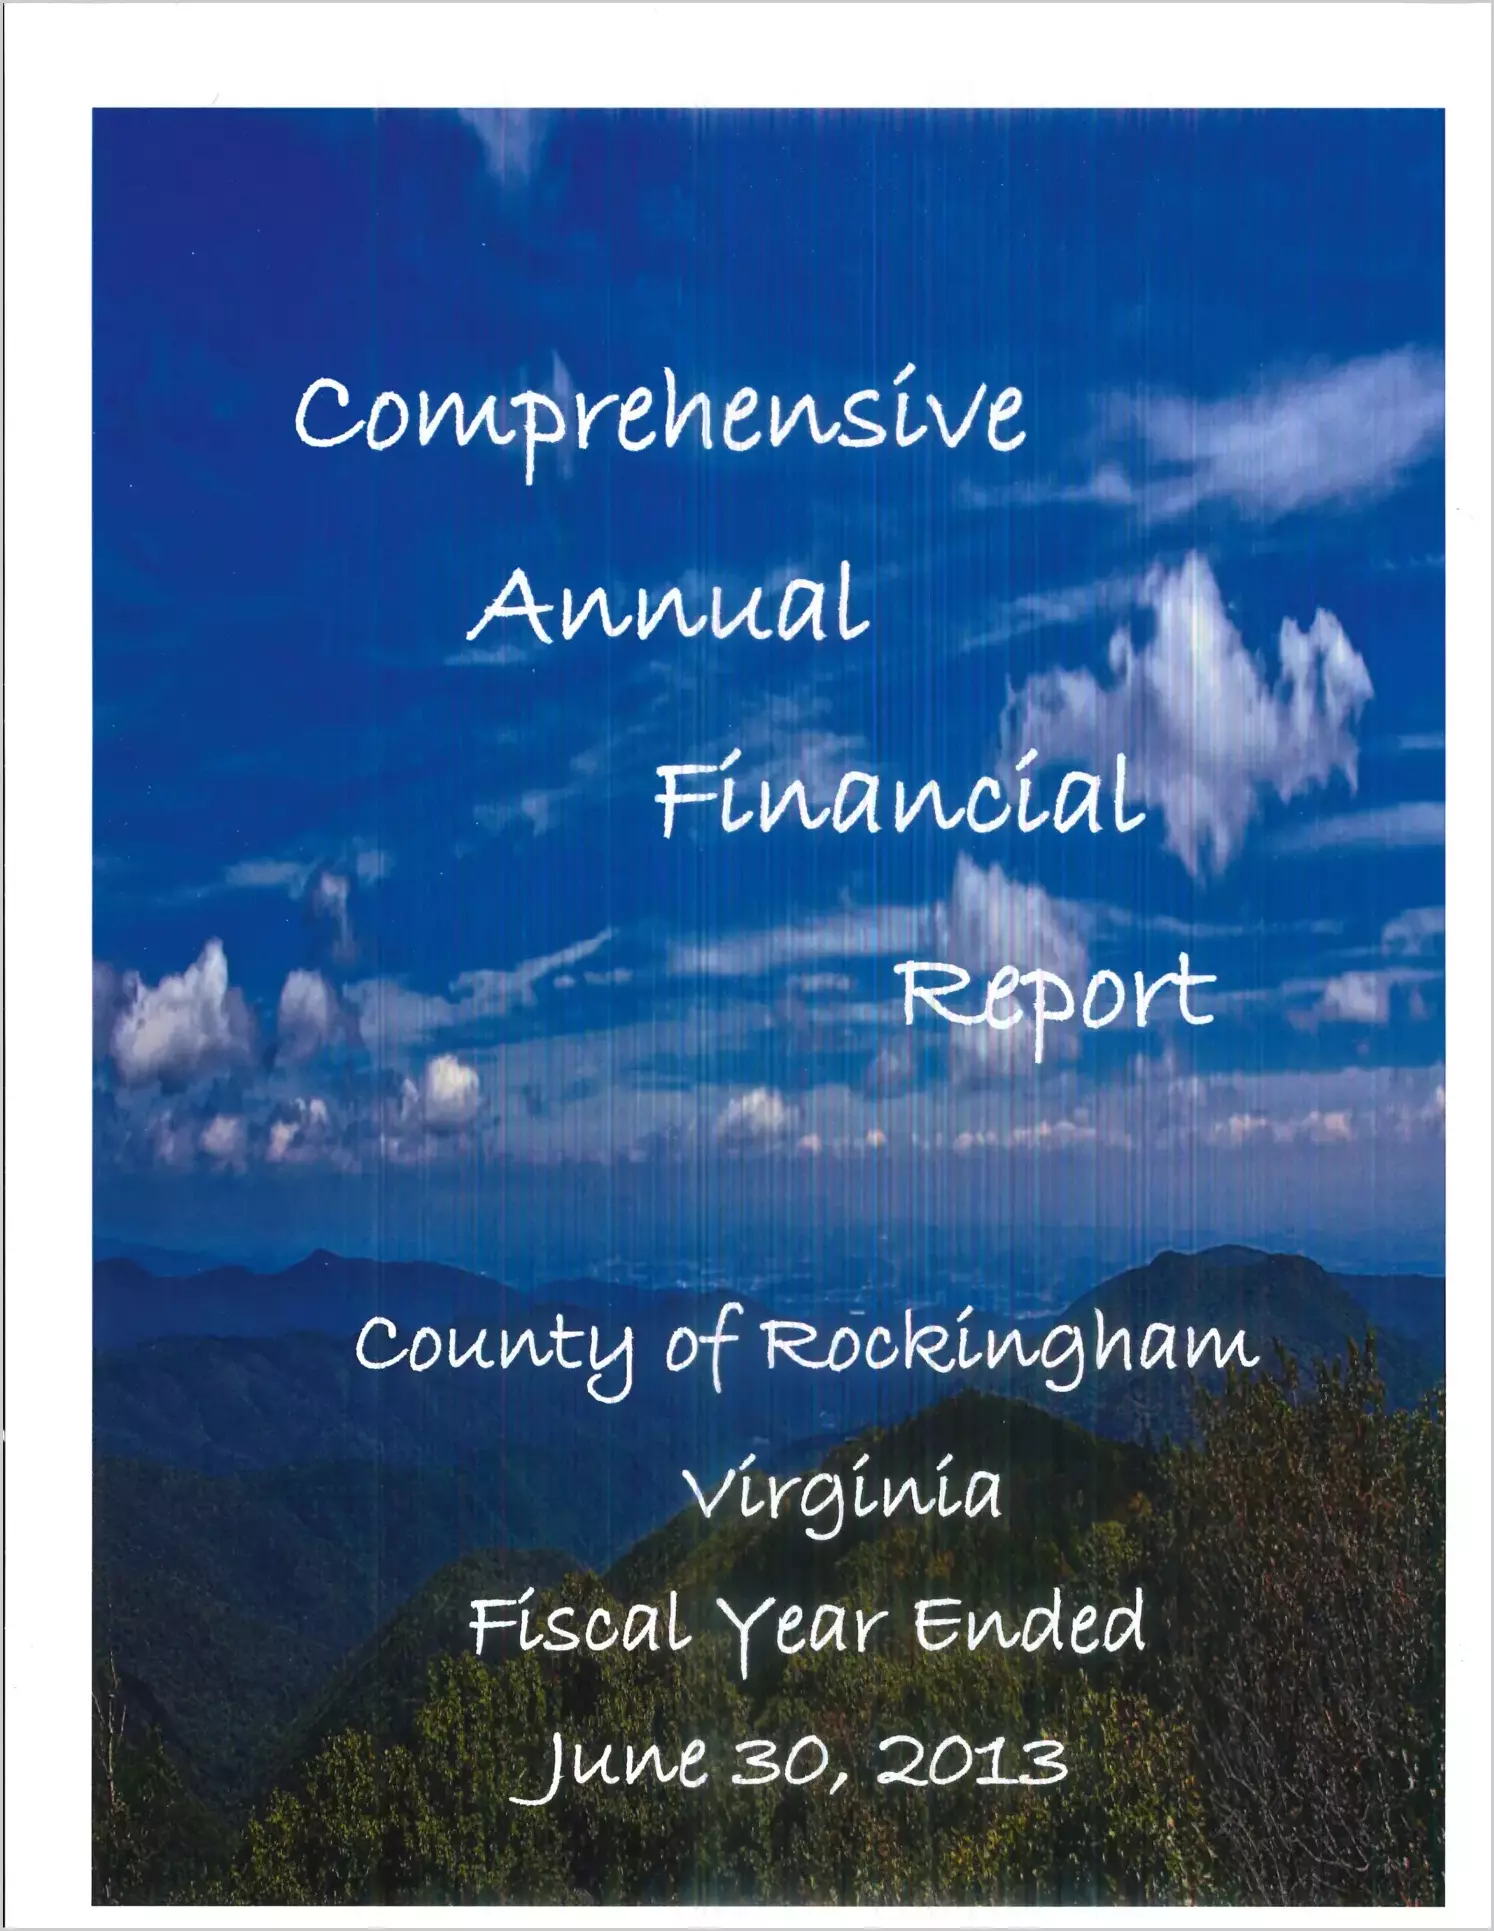 2013 Annual Financial Report for County of Rockingham